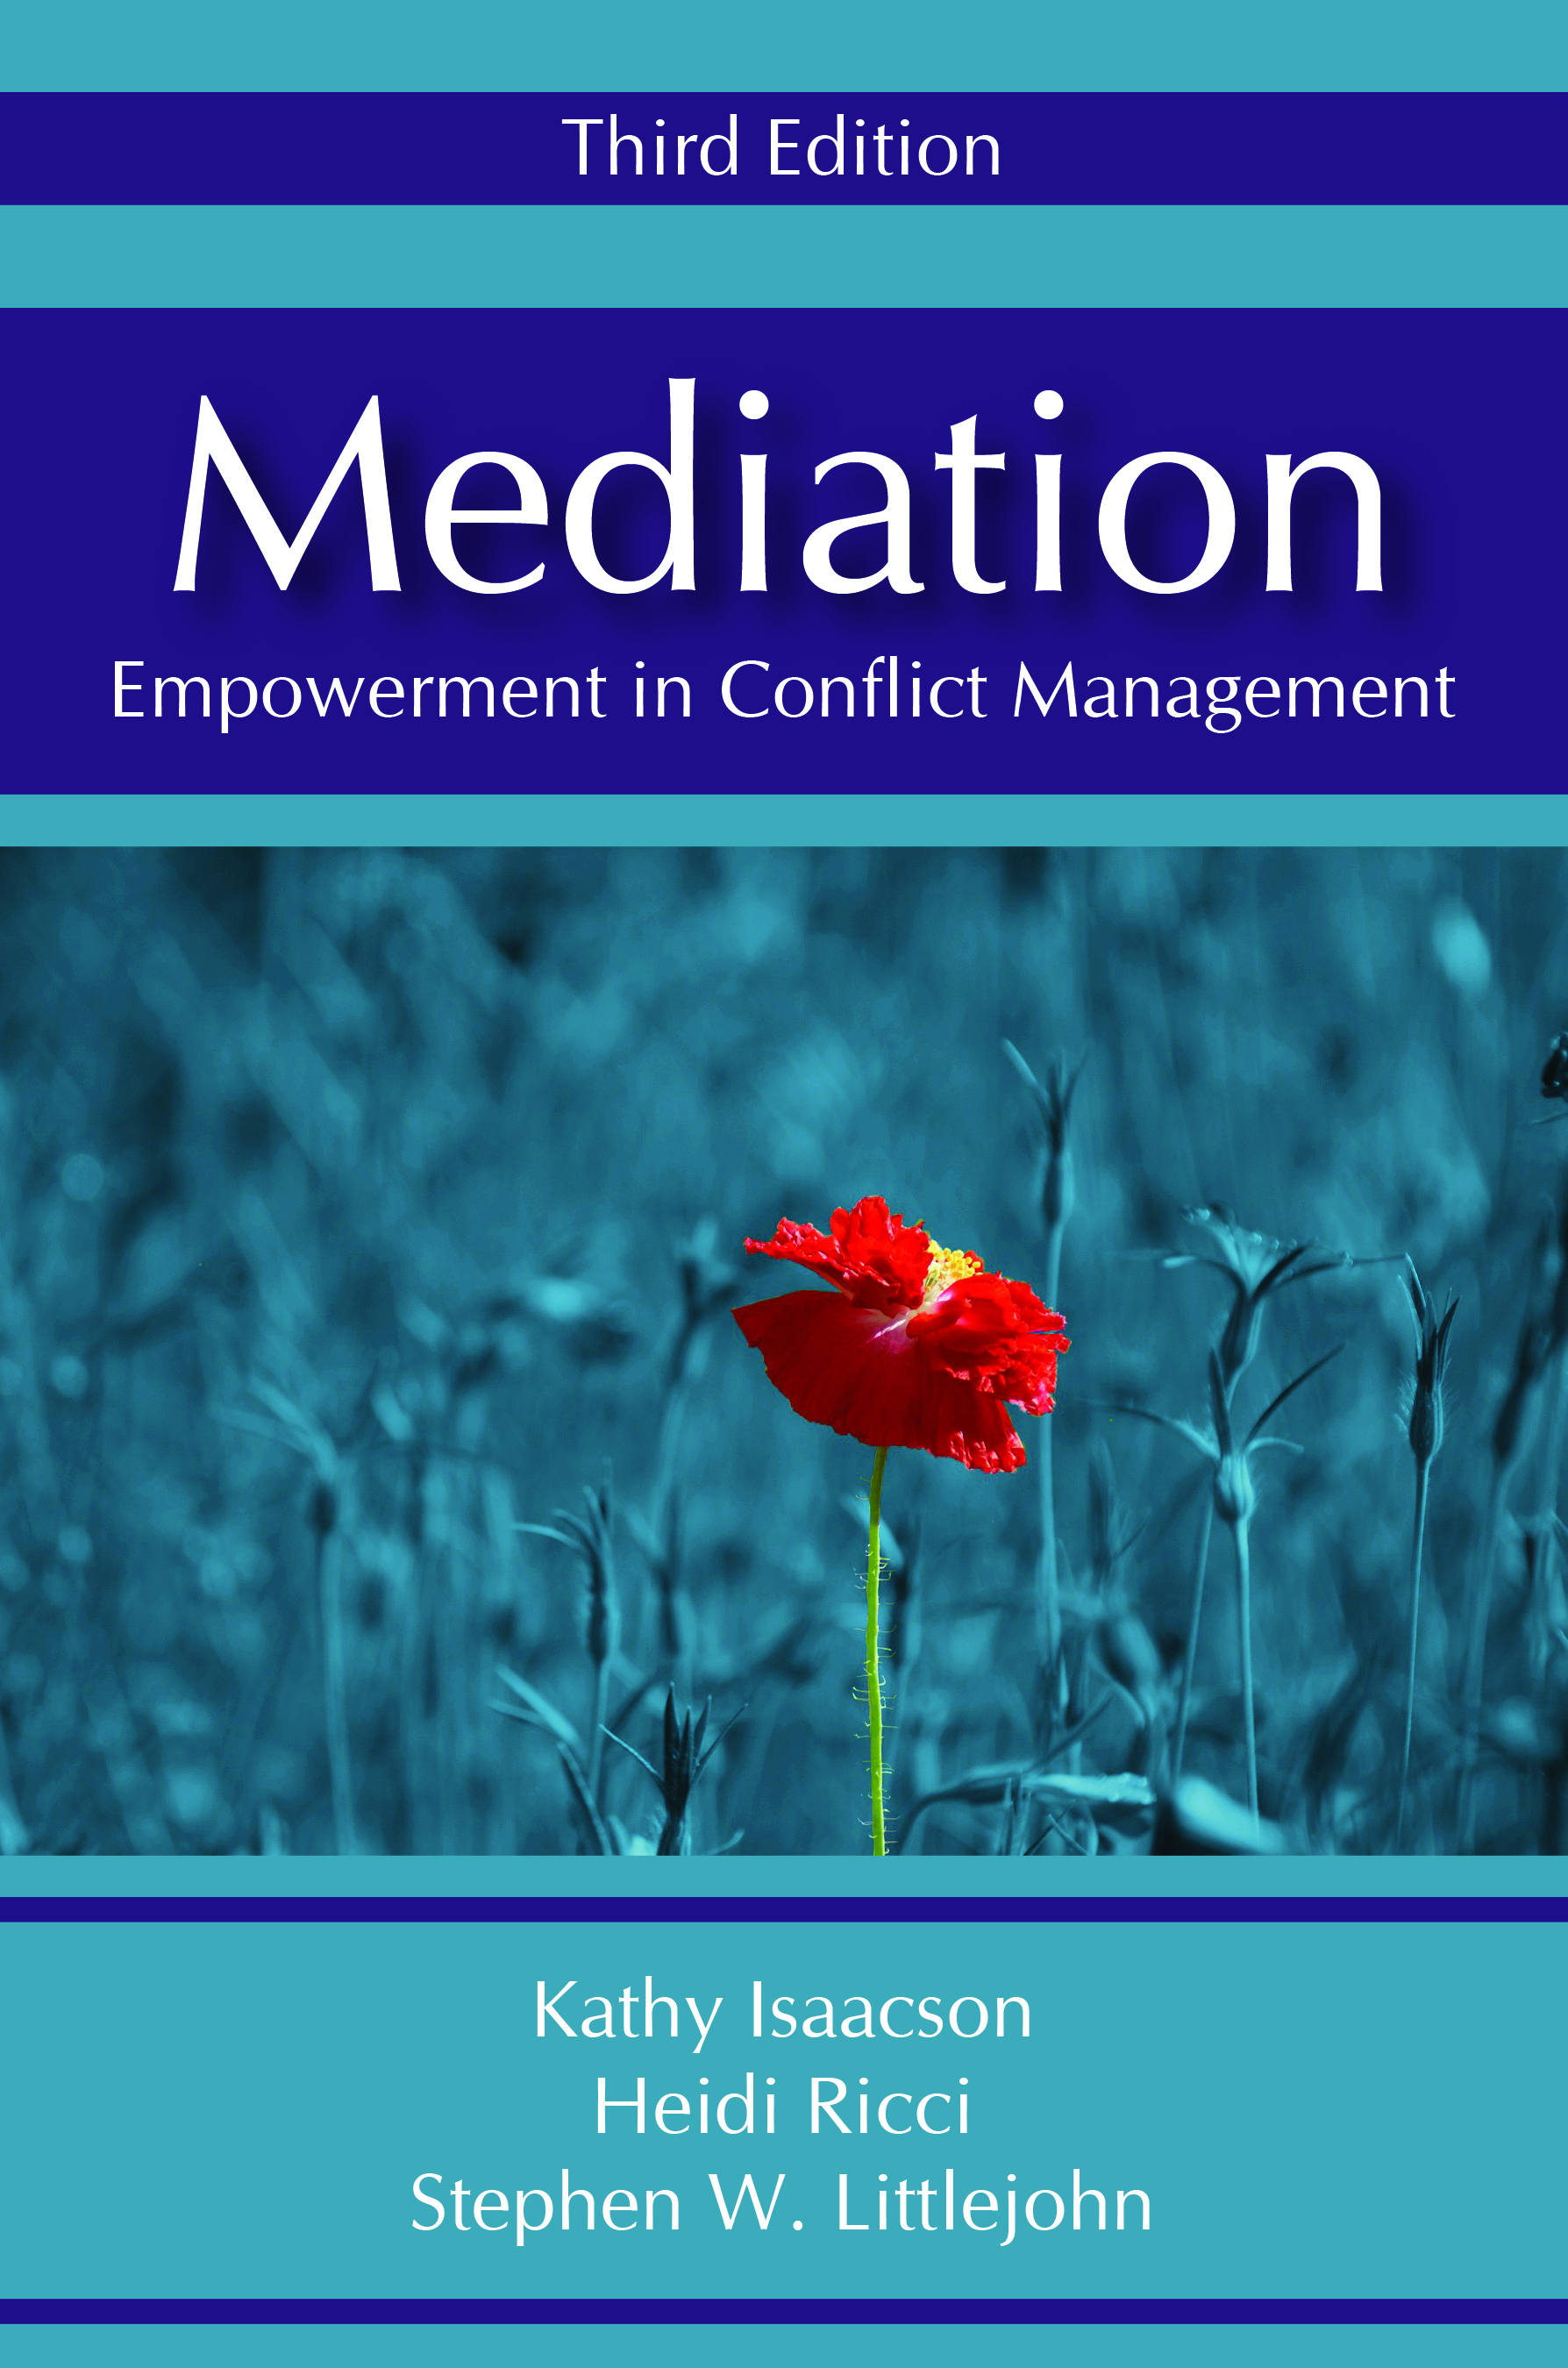 Mediation: Empowerment in Conflict Management, Third Edition by Kathy  Isaacson, Heidi  Ricci, Stephen W. Littlejohn